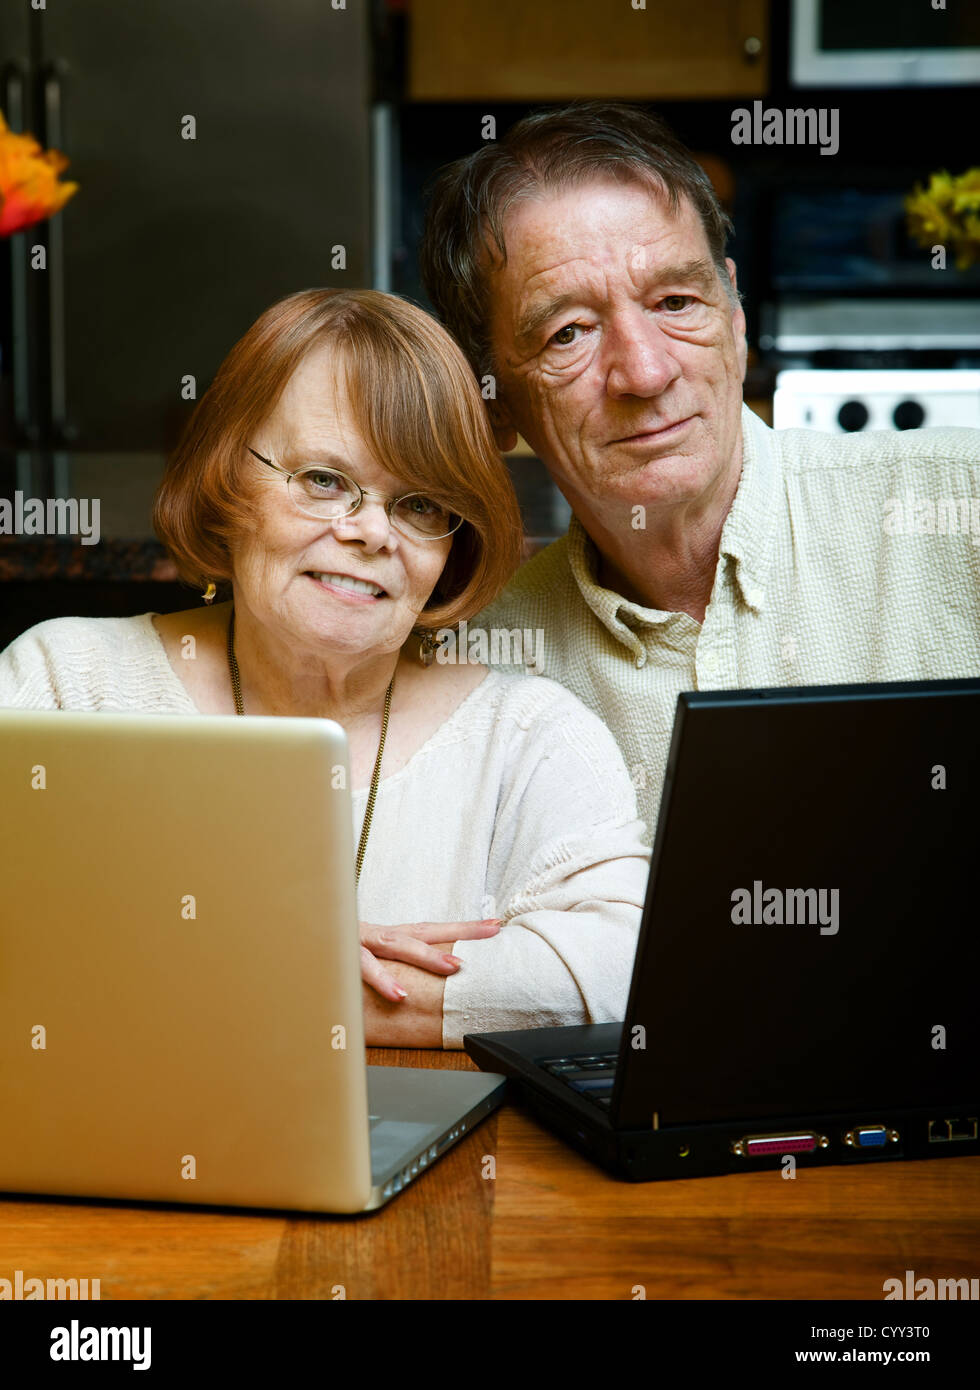 Senior couple using two laptop computers at home Stock Photo